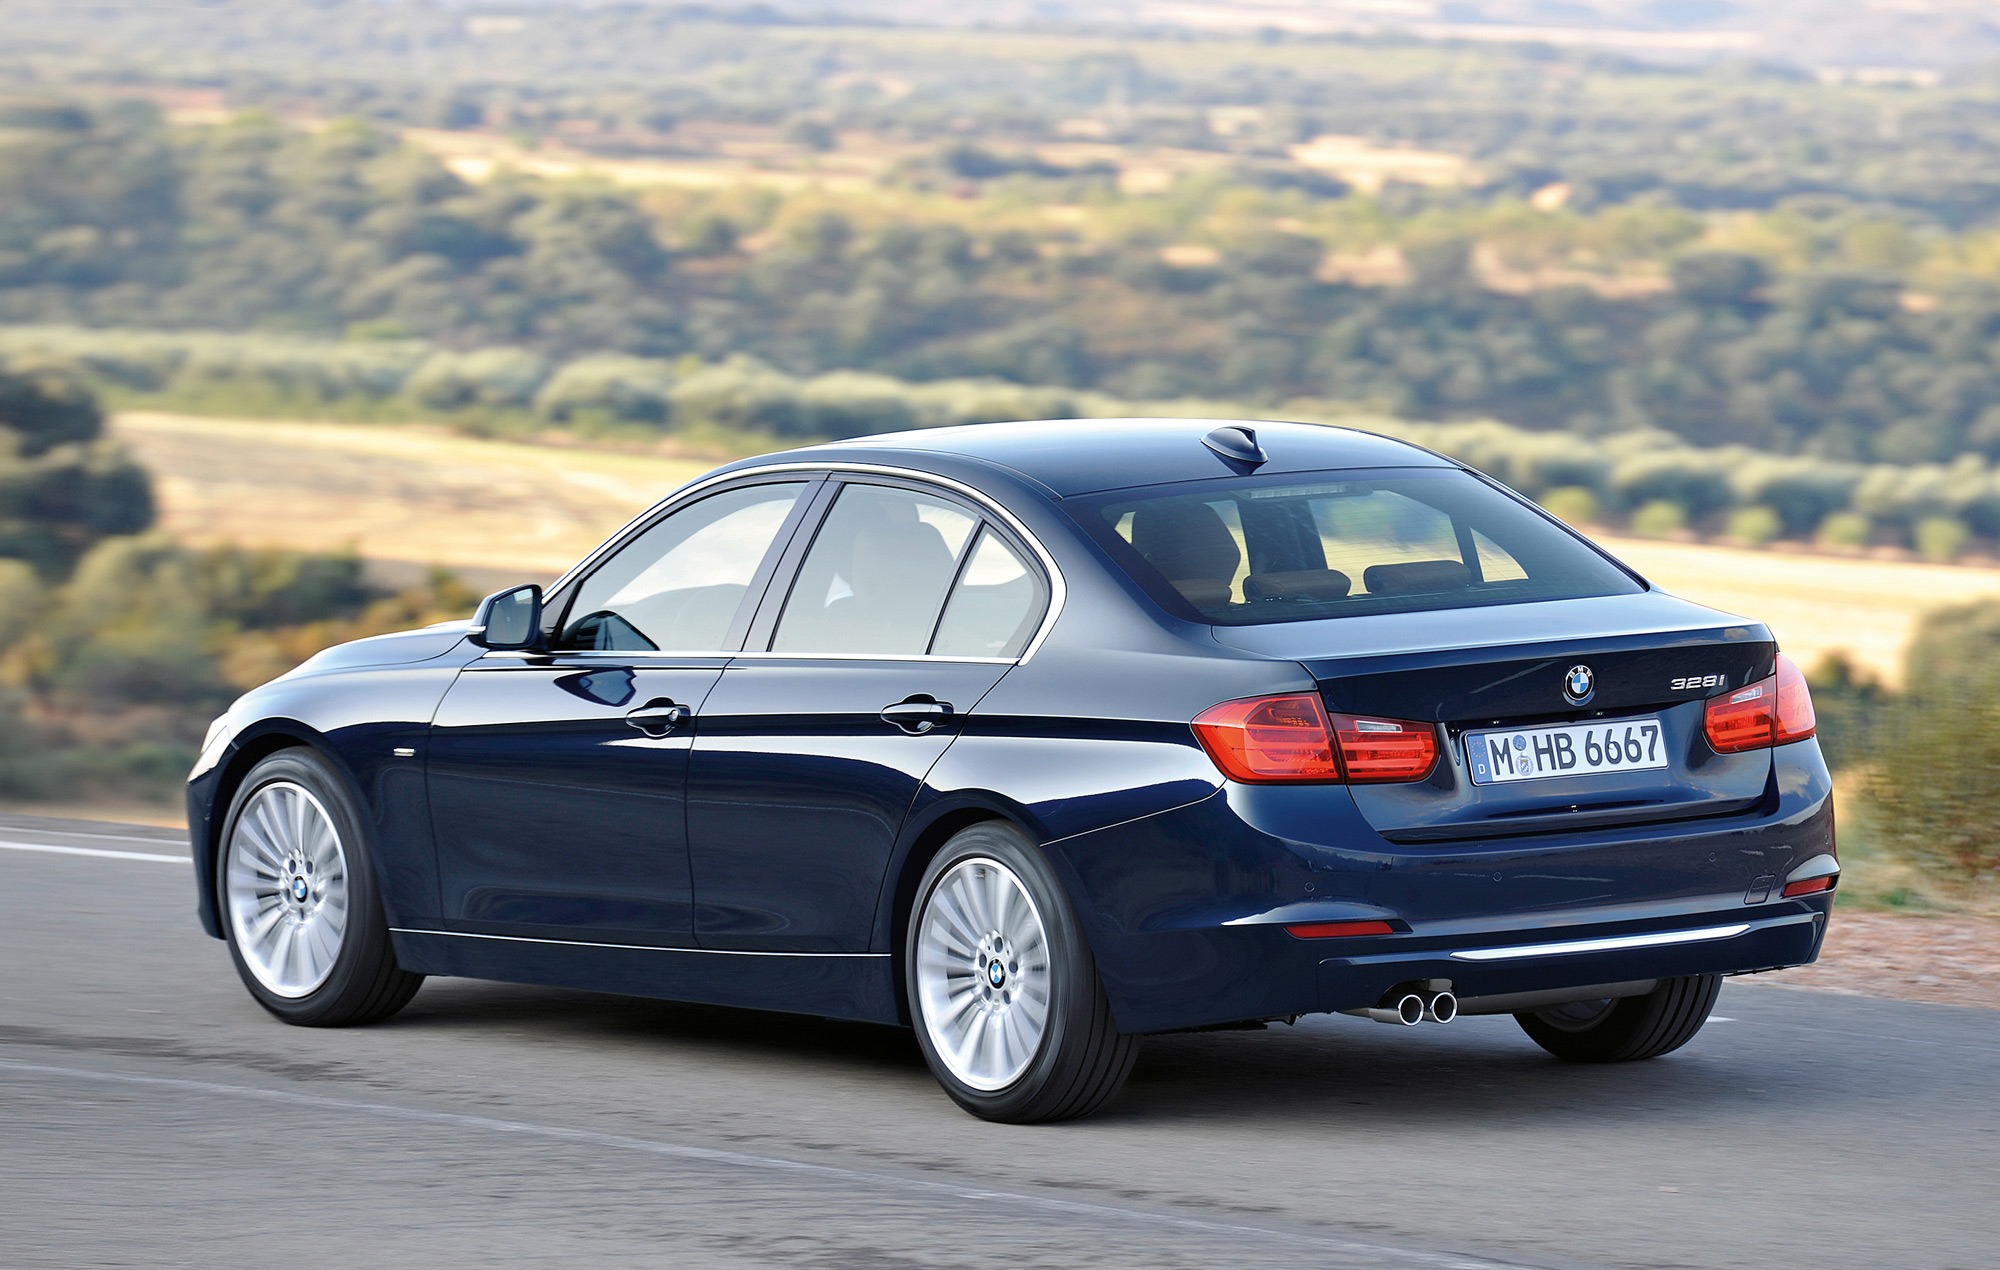 BMW 3 Series Exterior Rear Side View